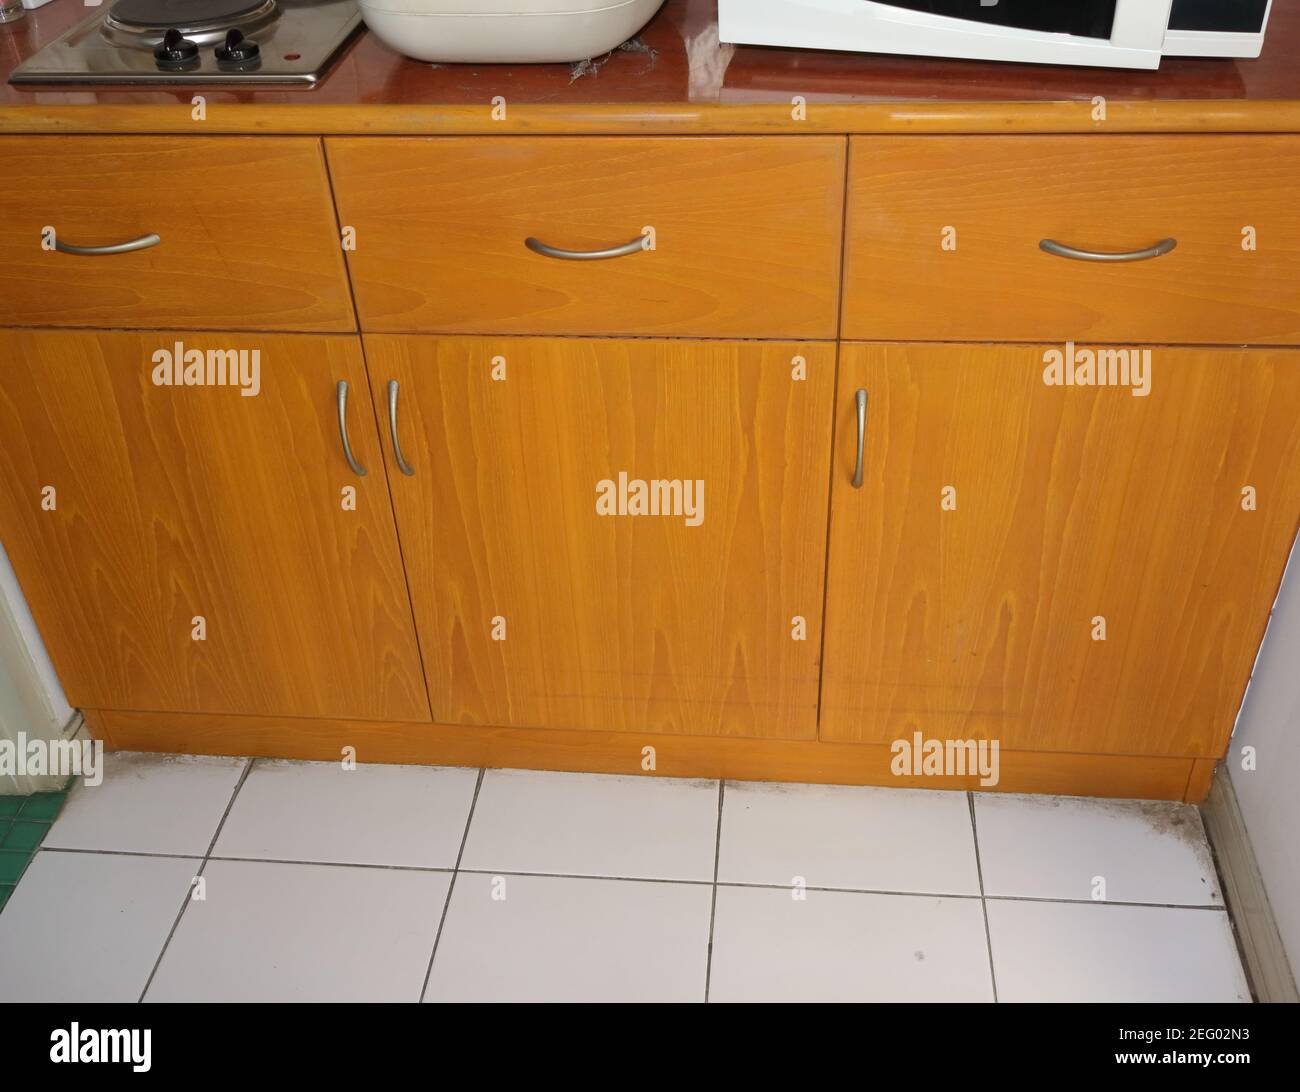 High angle view of built-in kitchen cabinet made from teak plywood, with laminated plastic countertop Stock Photo